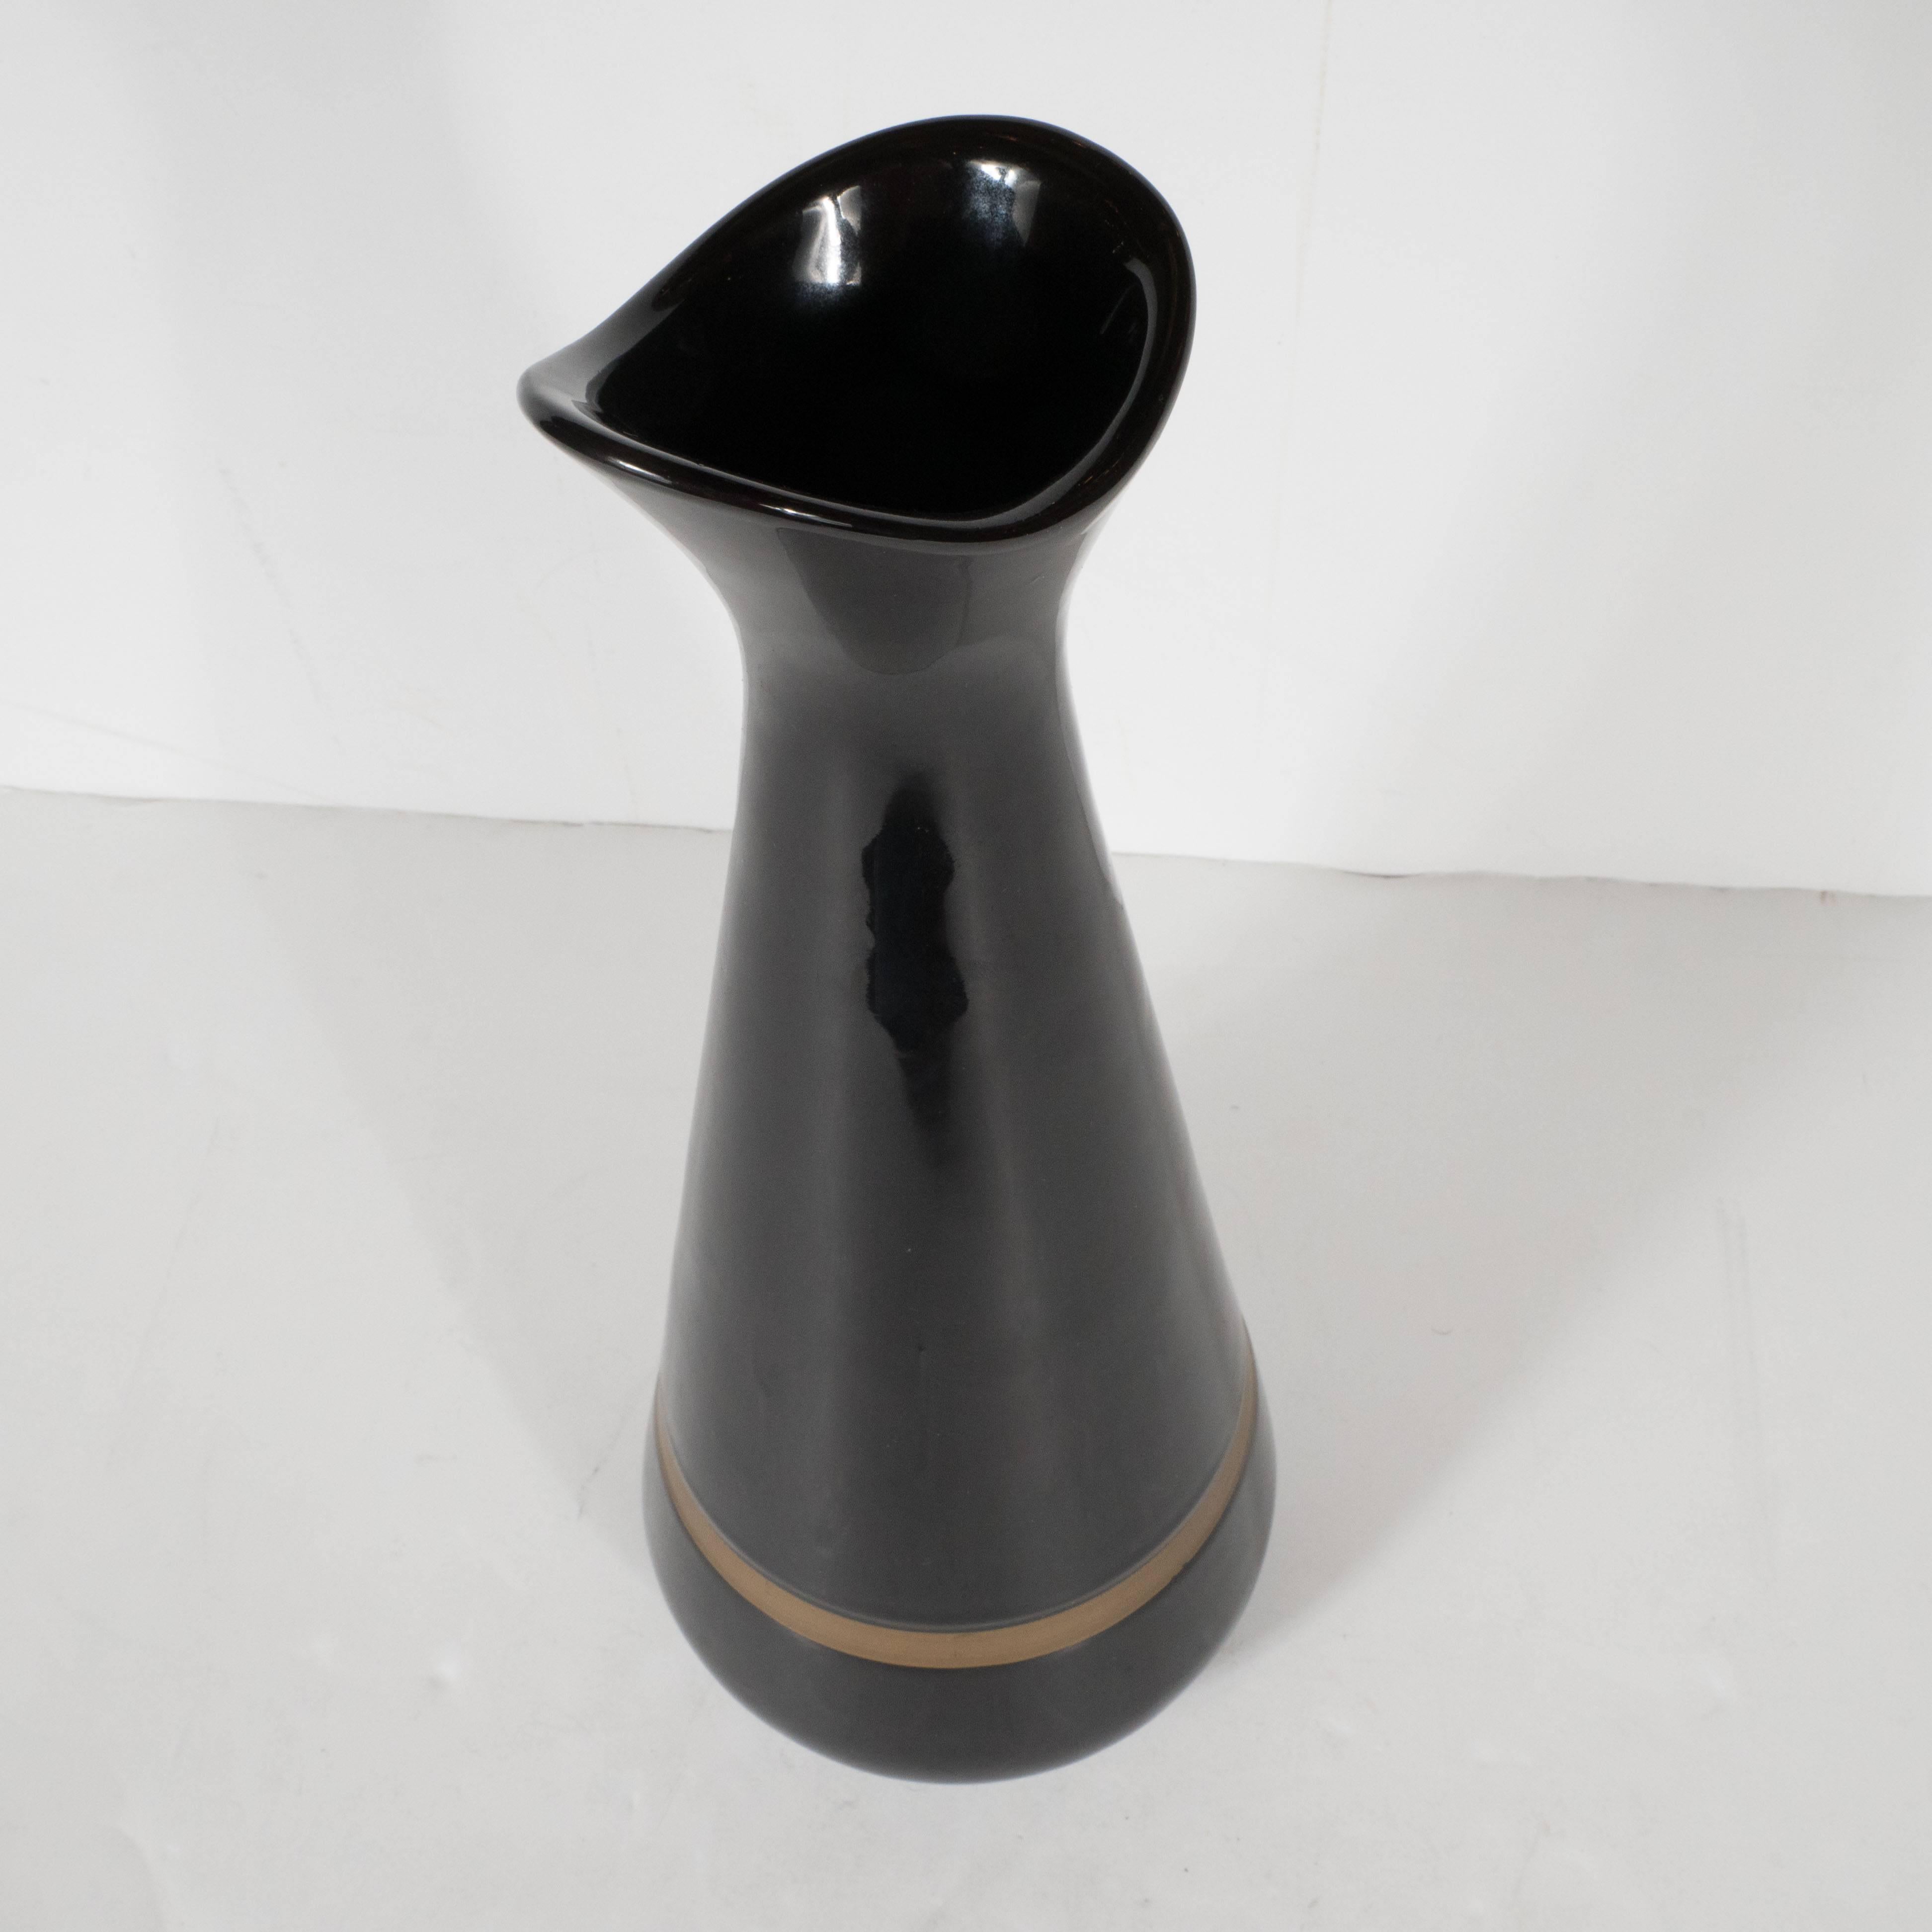 American Mid-Century Modernist Hourglass Black Ceramic Vase with Gold Band, Hull Pottery